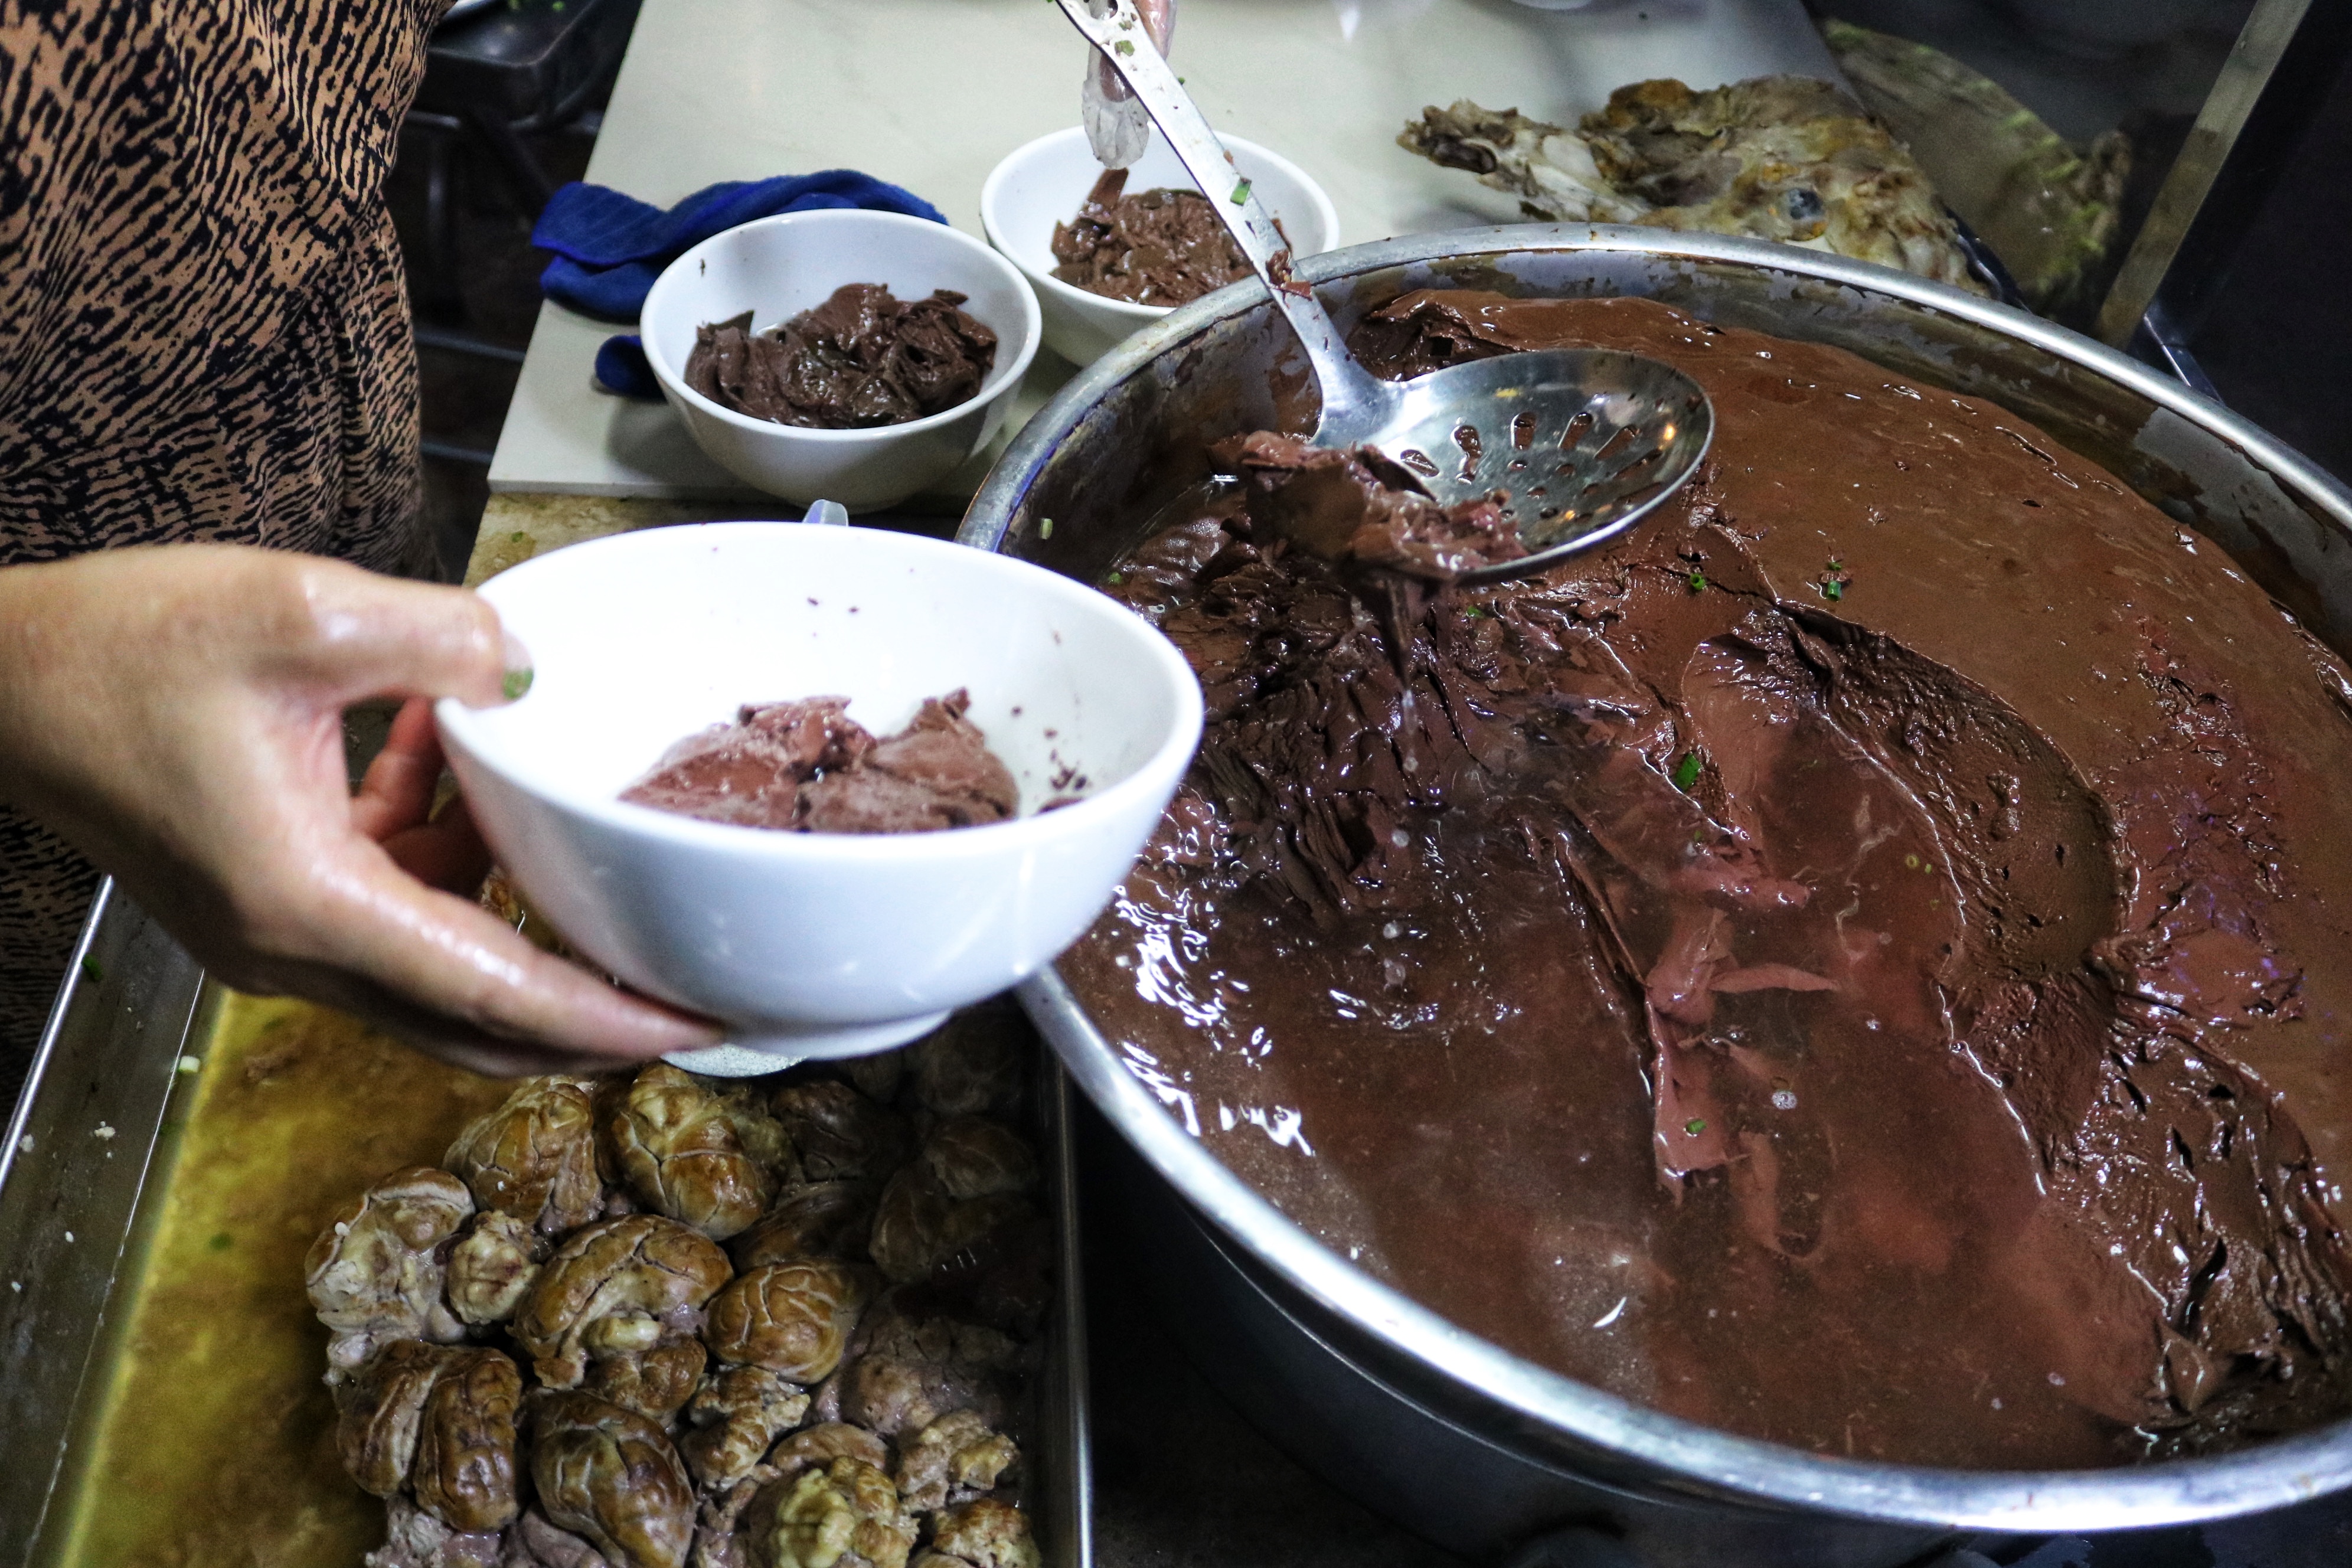 Pham Thi Hoa scoops blood pudding to serve diners at her stall on Pham Van Hai Street in Tan Binh District, Ho Chi Minh City. Photo: Hoang An / Tuoi Tre News